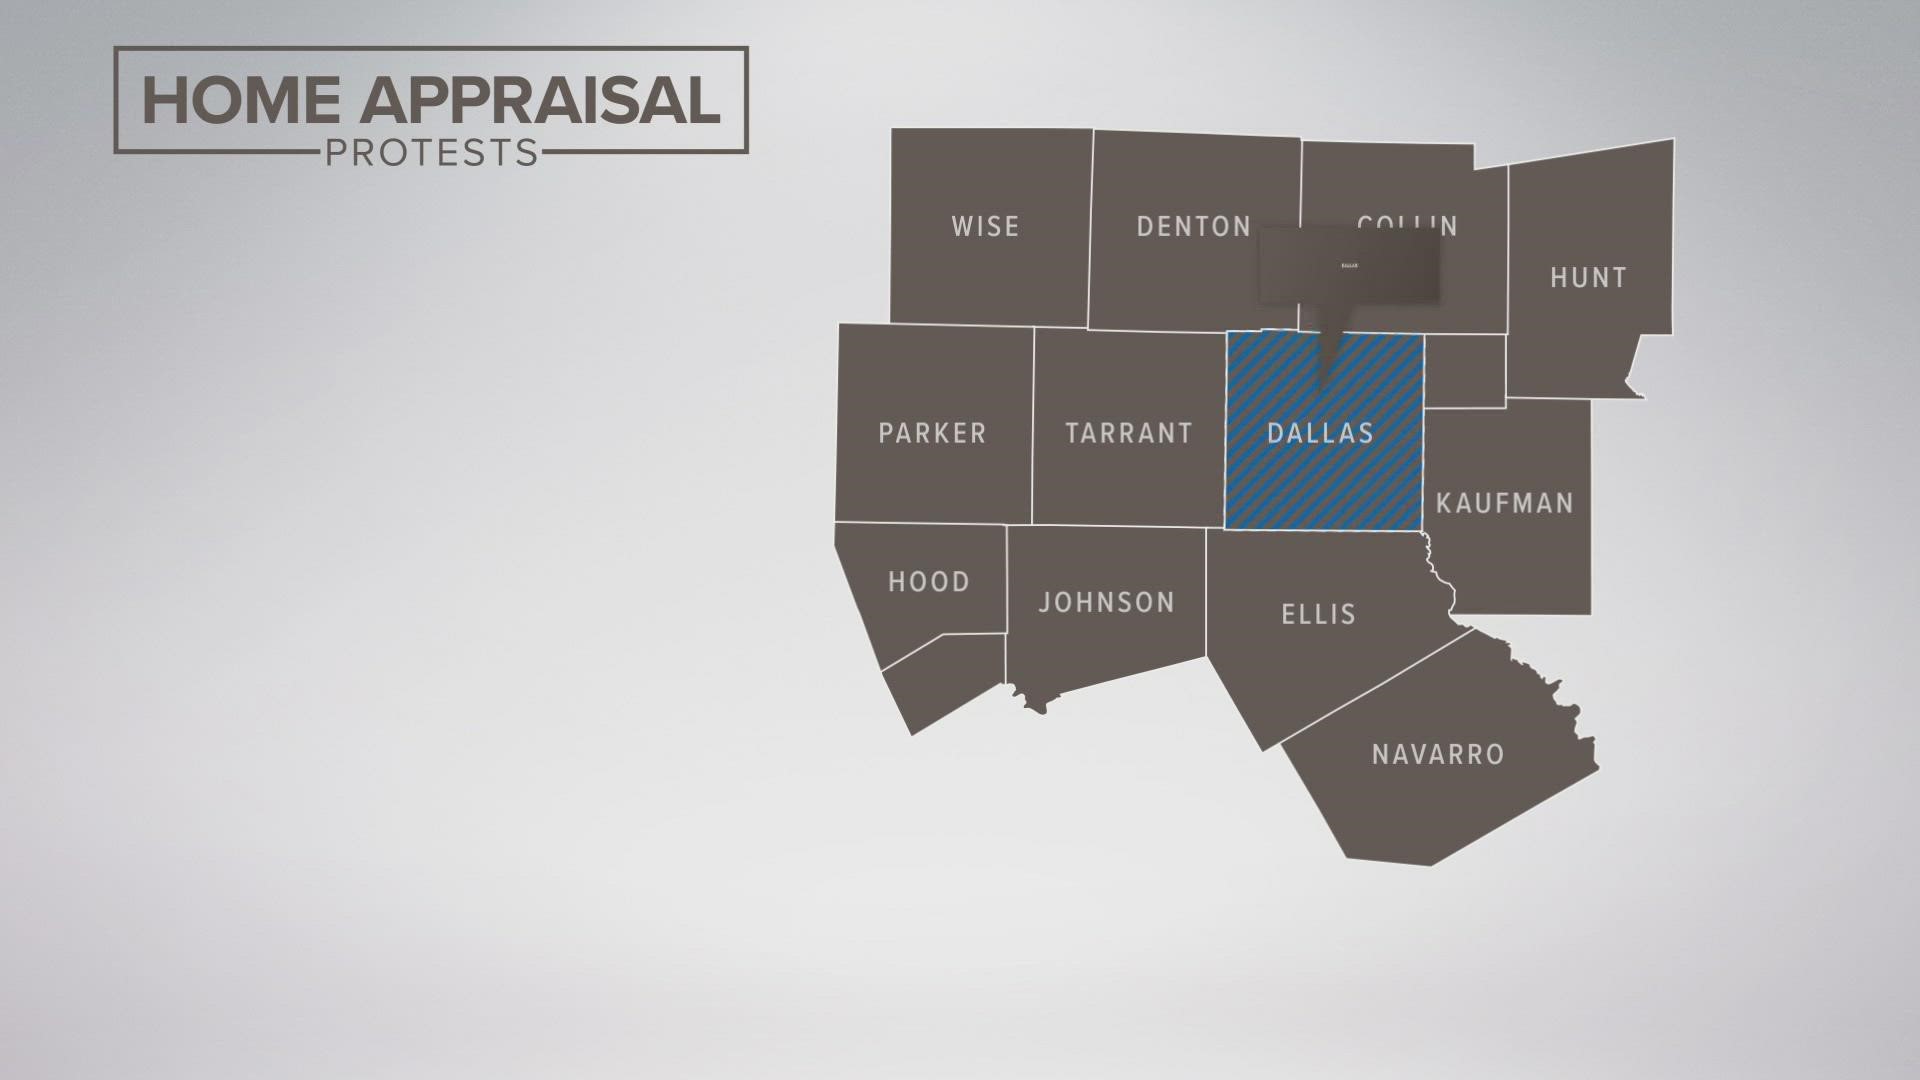 As of Thursday, the Dallas Central Appraisal District had received 176,337 protests for residential and business properties.